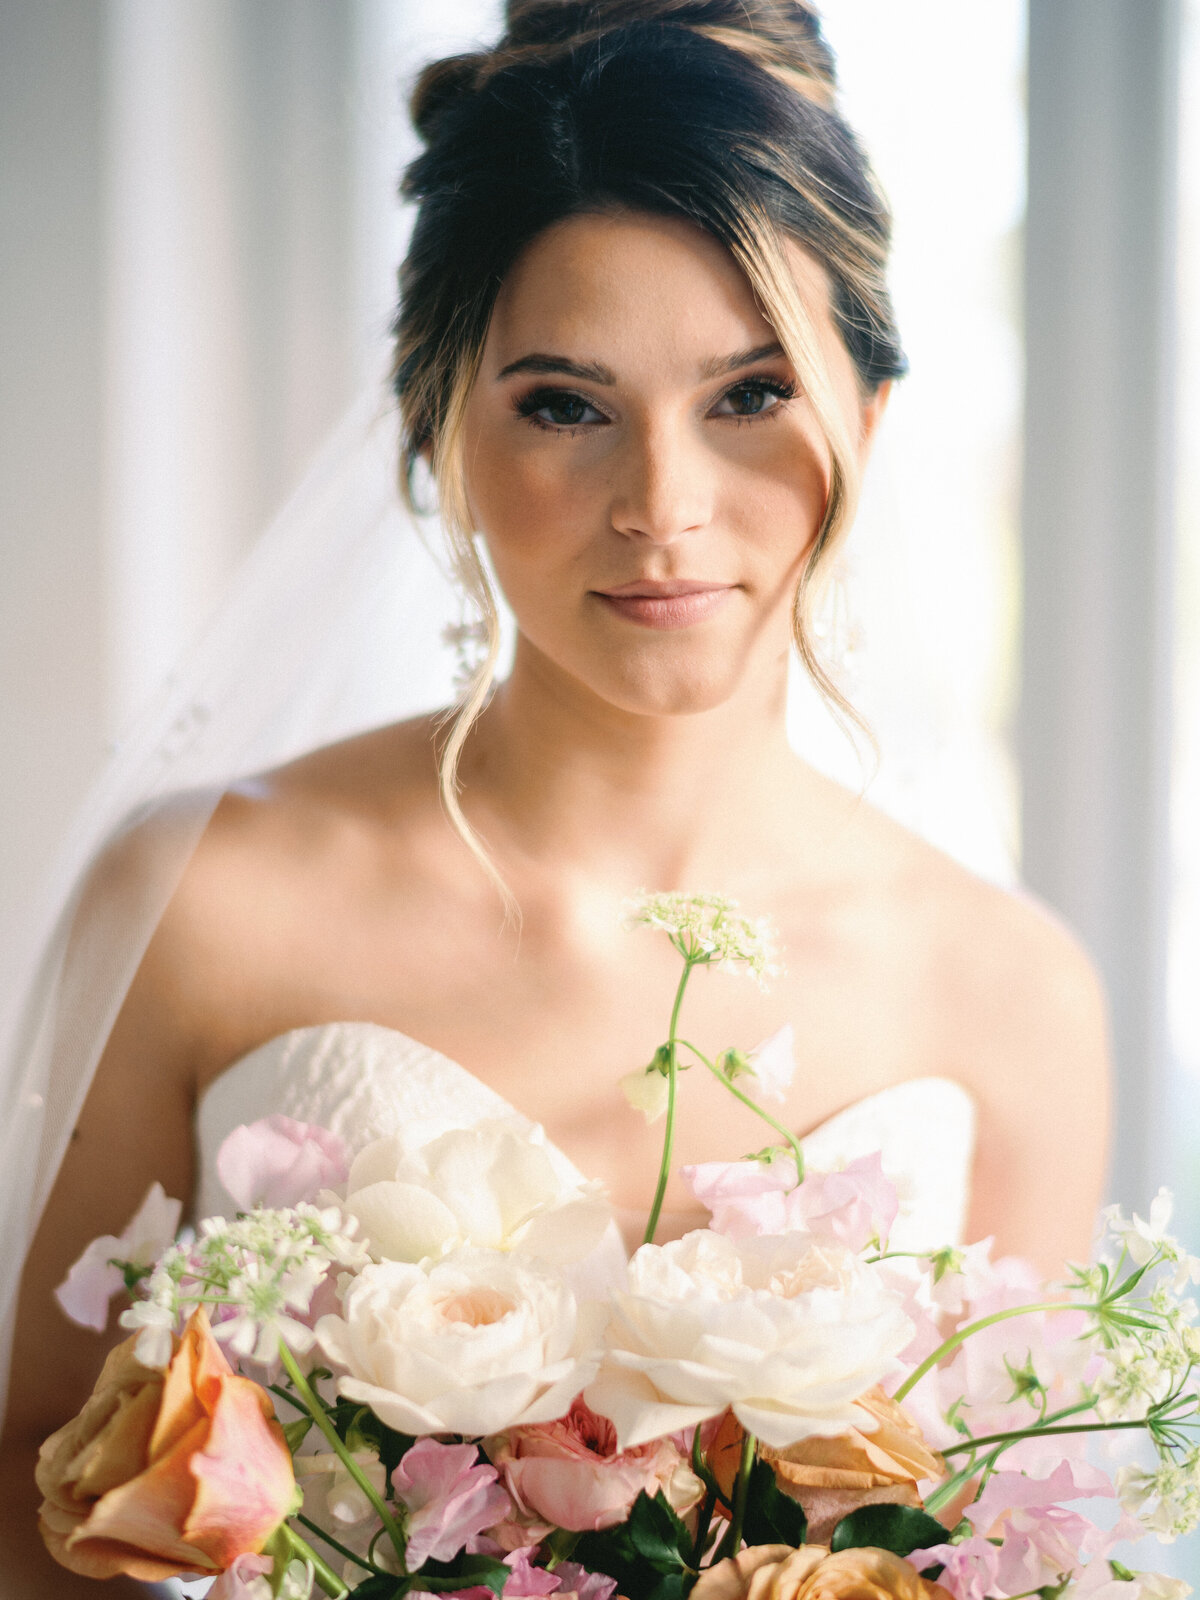 Fine Art bride posing by window with colorful garden party bouquet